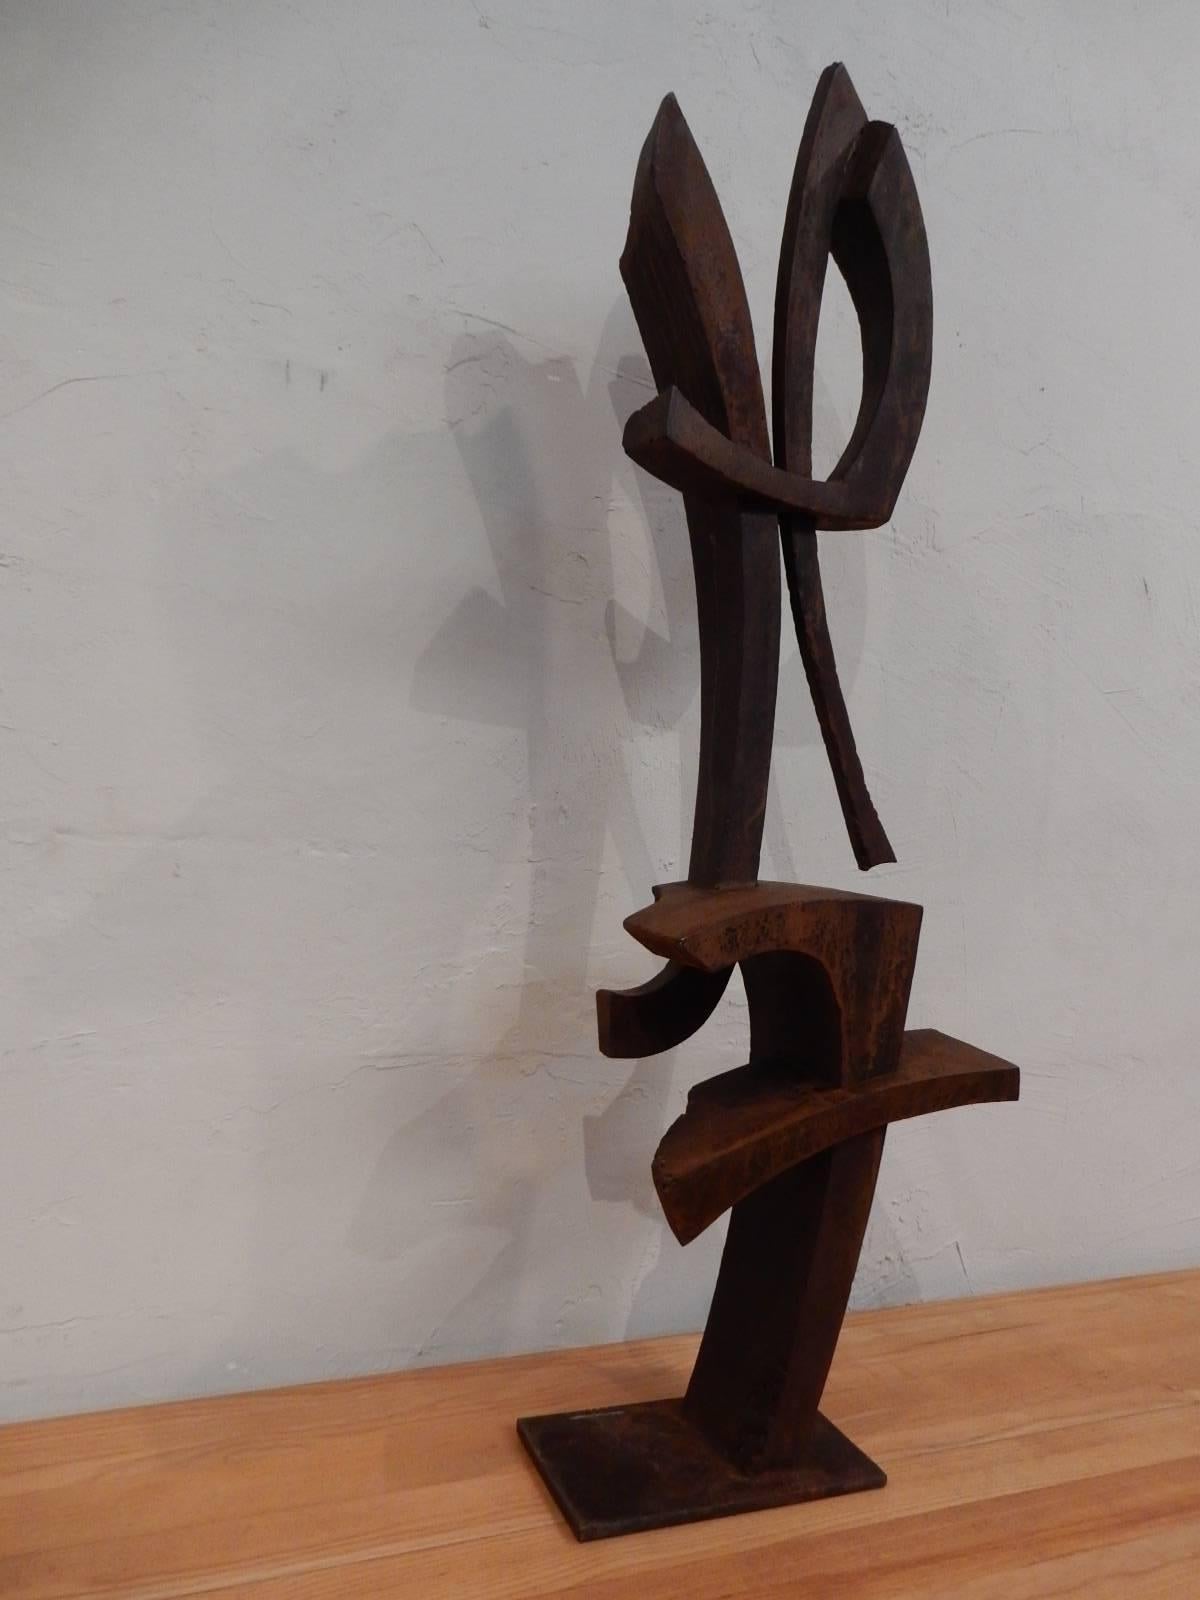 Abstract contemporary Cyrille Husson sculpture made of Korten steel,
circa 2015 unique piece.